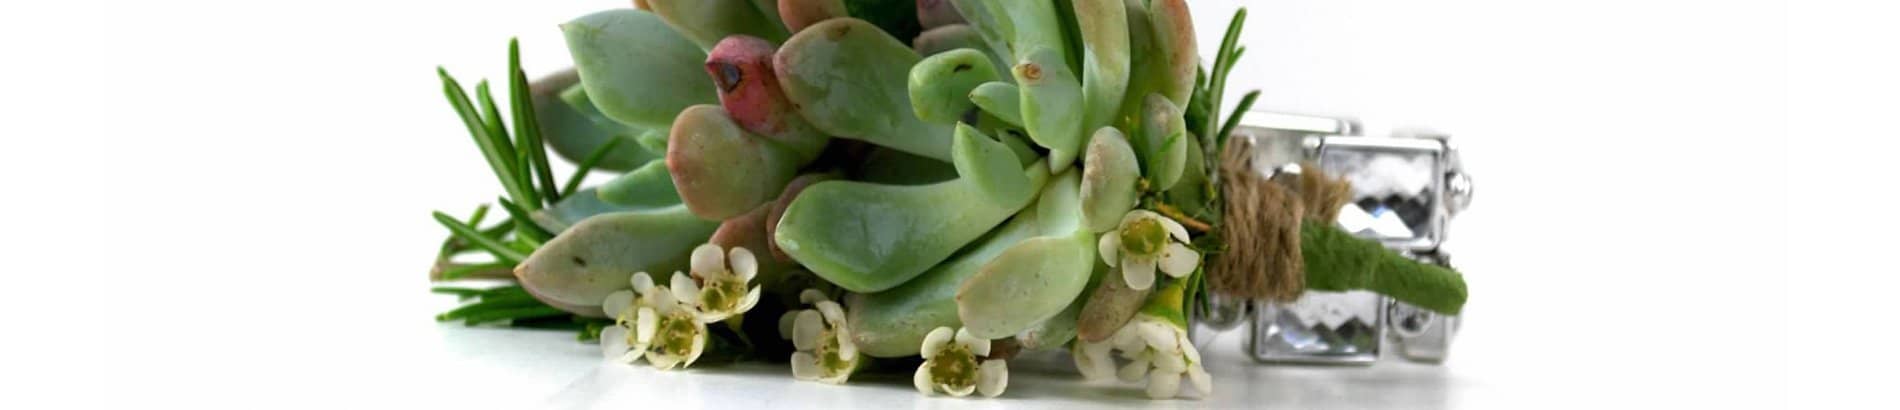 boutonnieres corsages wedding with succulents header 1